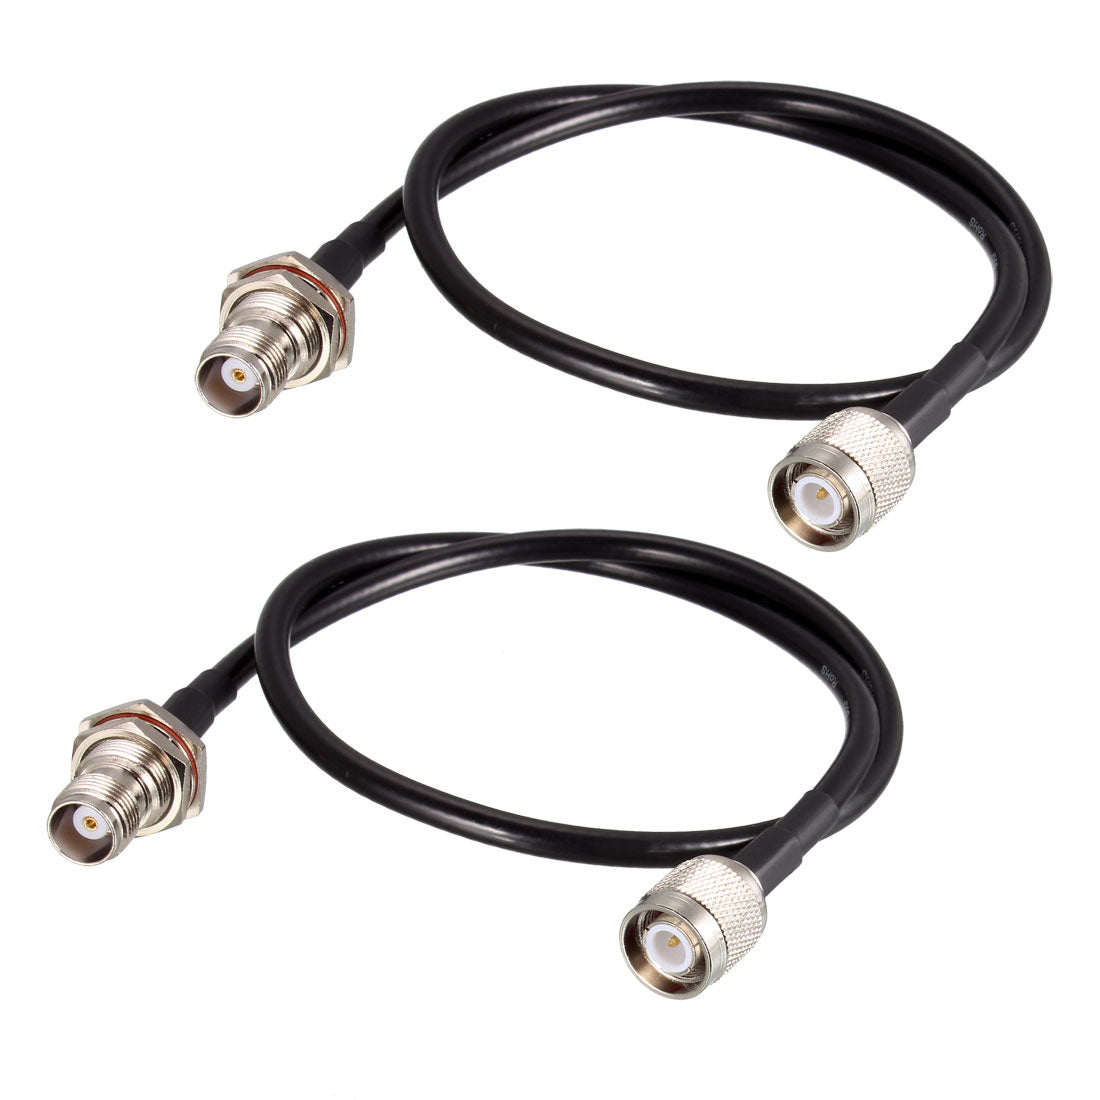 Uxcell Uxcell RG58 RF Coaxial Cable TNC Male to TNC Female Pigtail Jumper Cable 20 Inch 2pcs